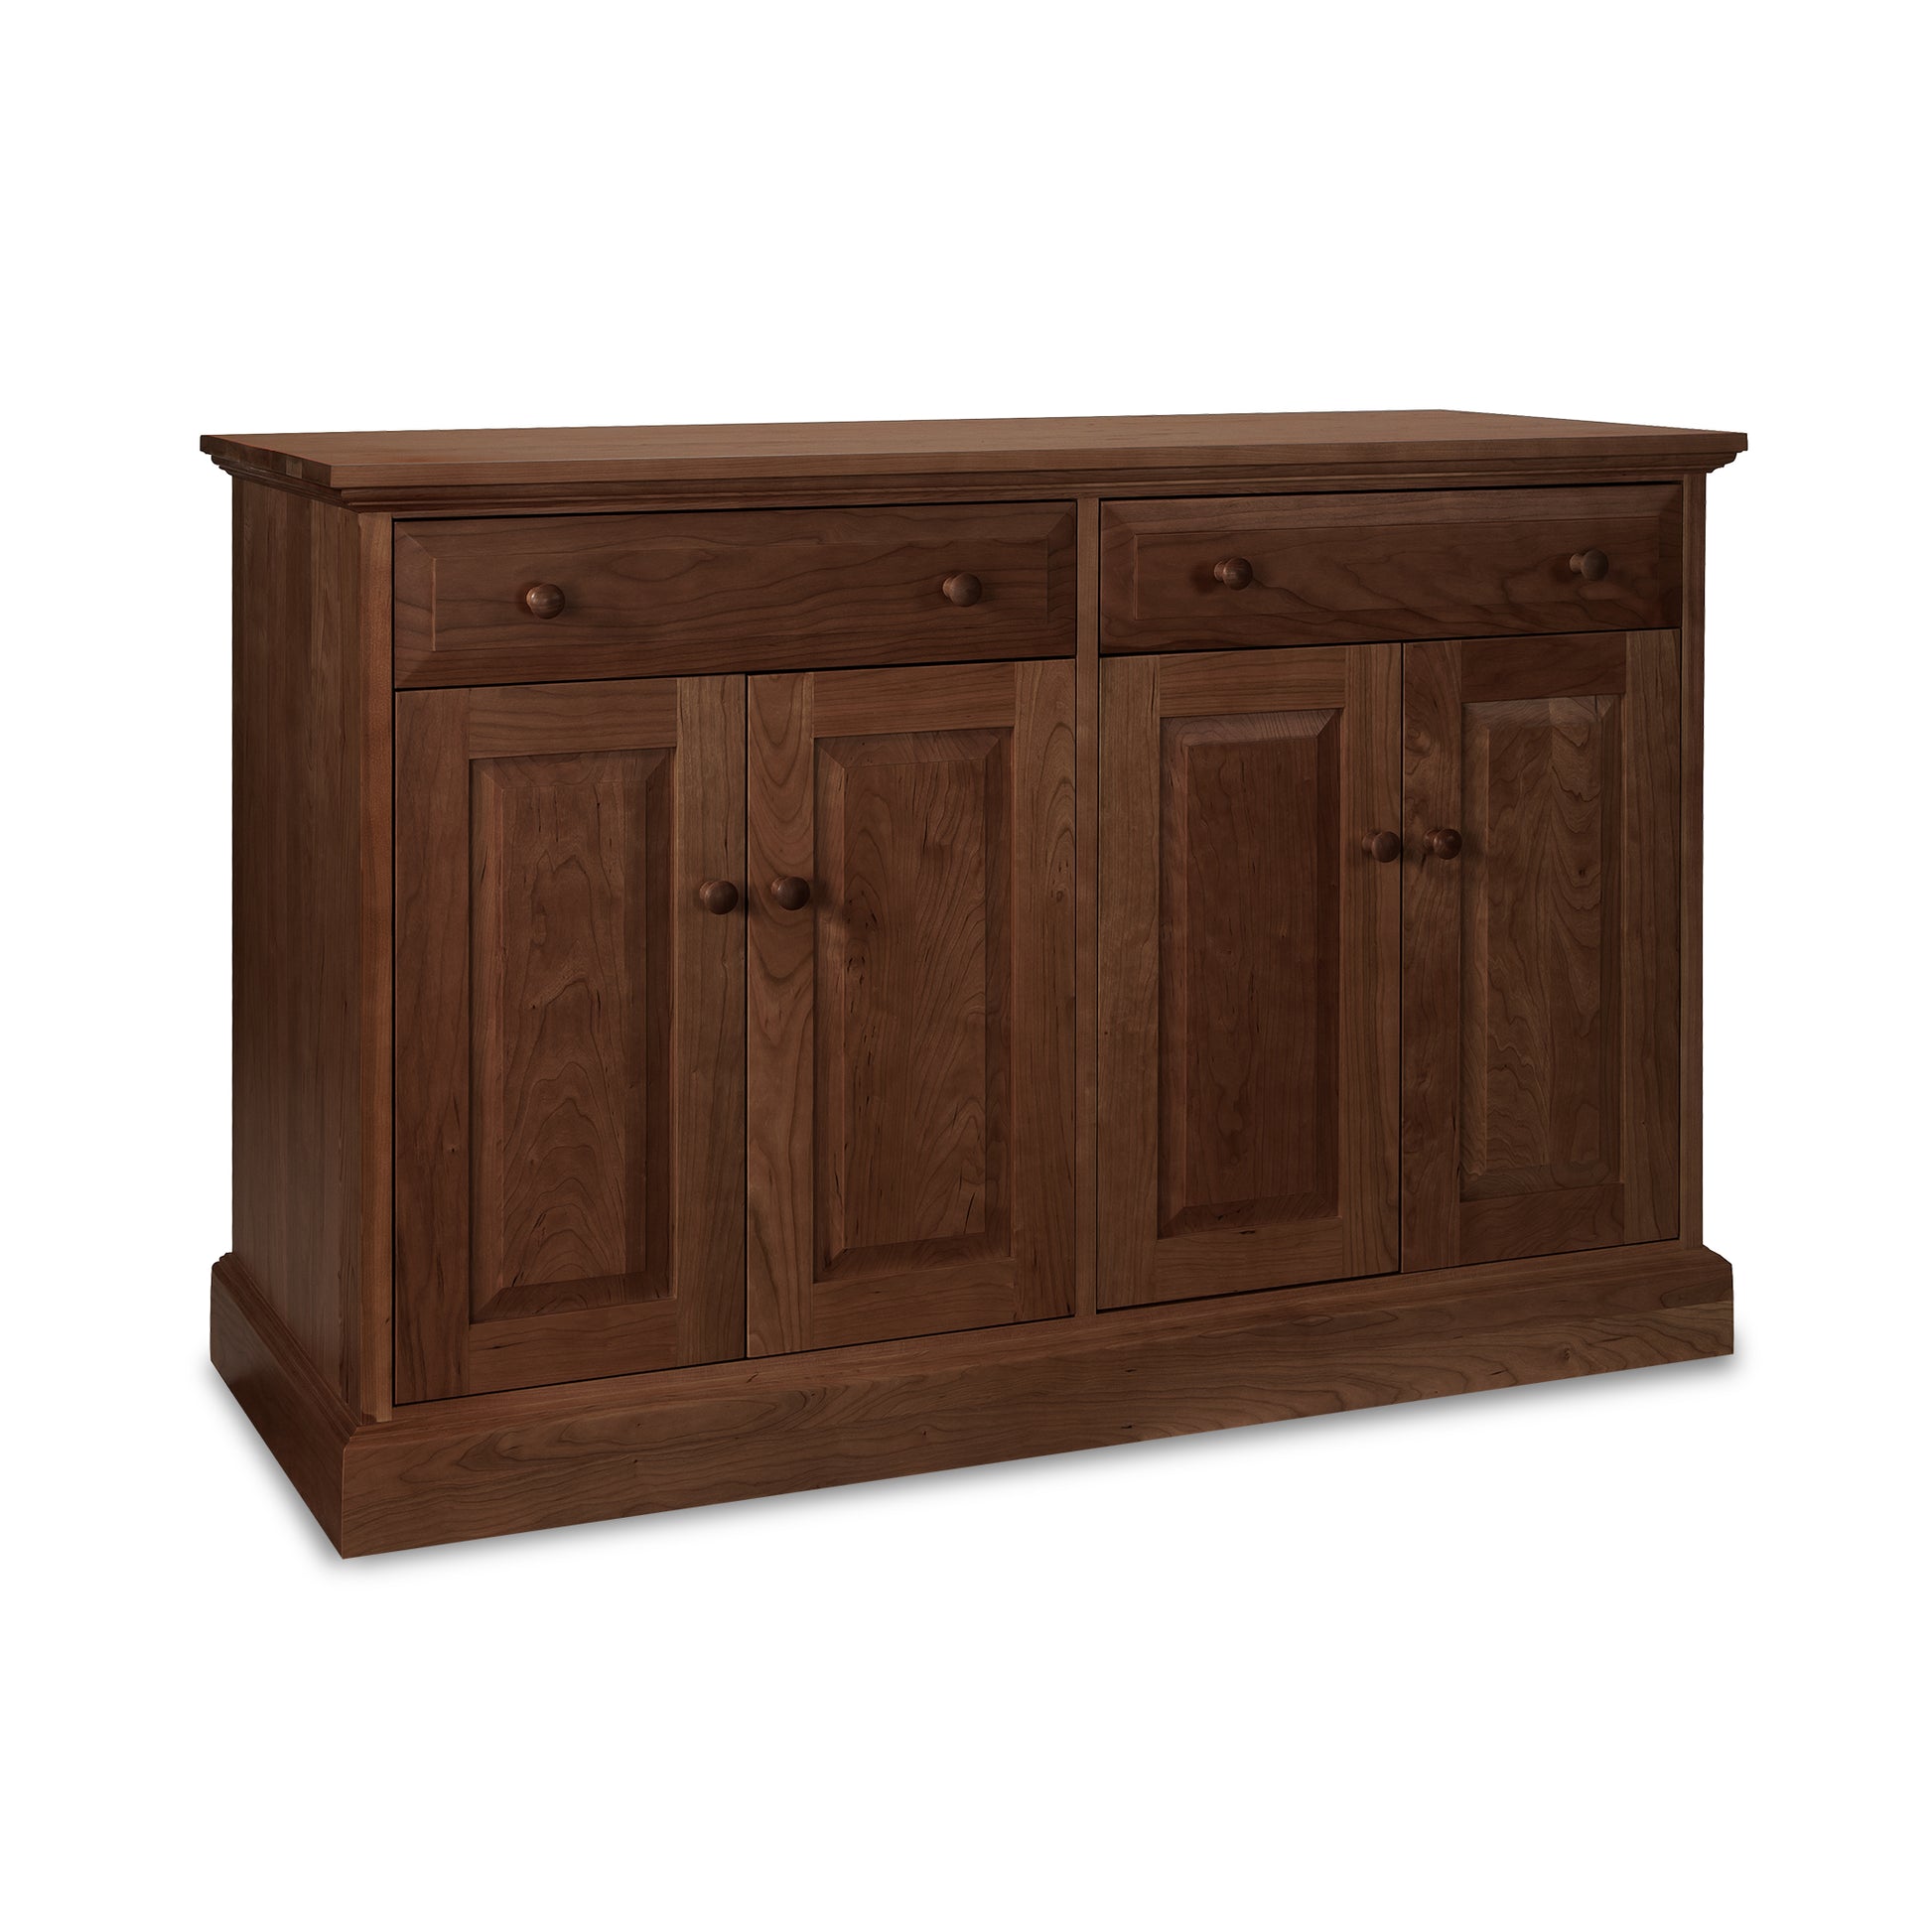 A New England Shaker Buffet by Lyndon Furniture, with two doors and two drawers, perfect for dining room storage.